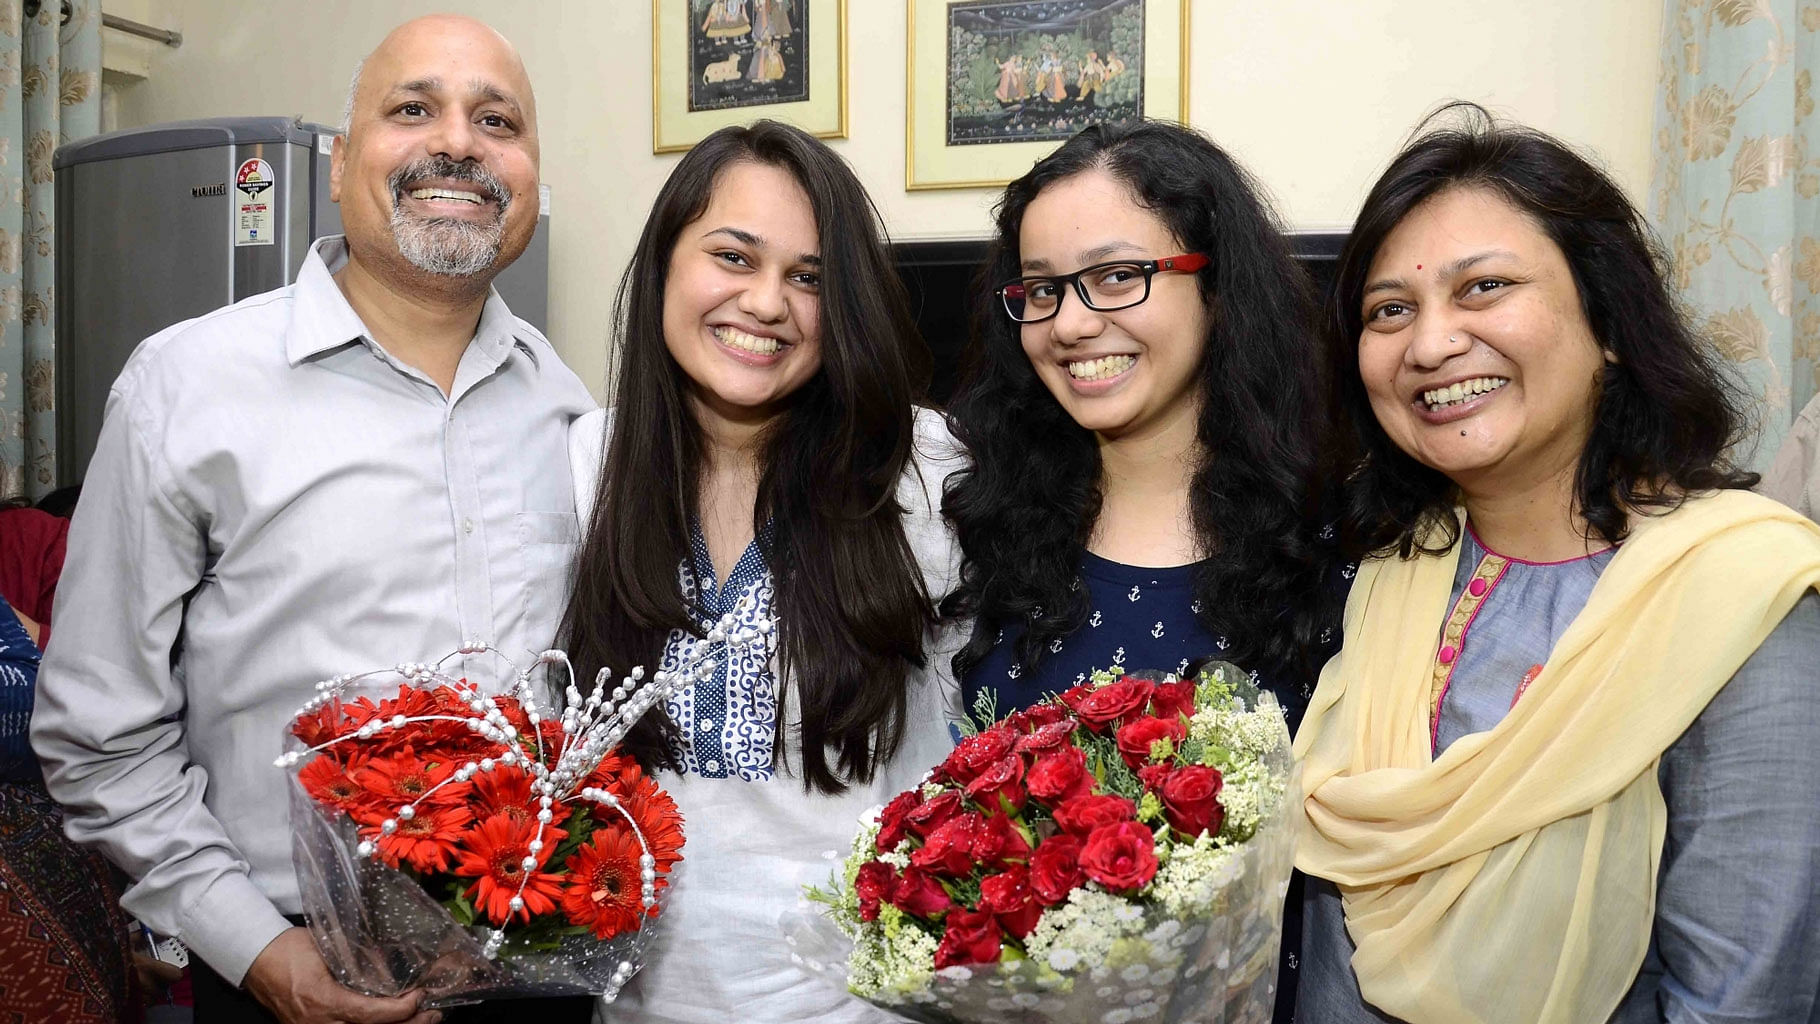 Tina Dabi and her family after getting the results of the civil services exam, where Tina emerged as the topper. (Photo: IANS)